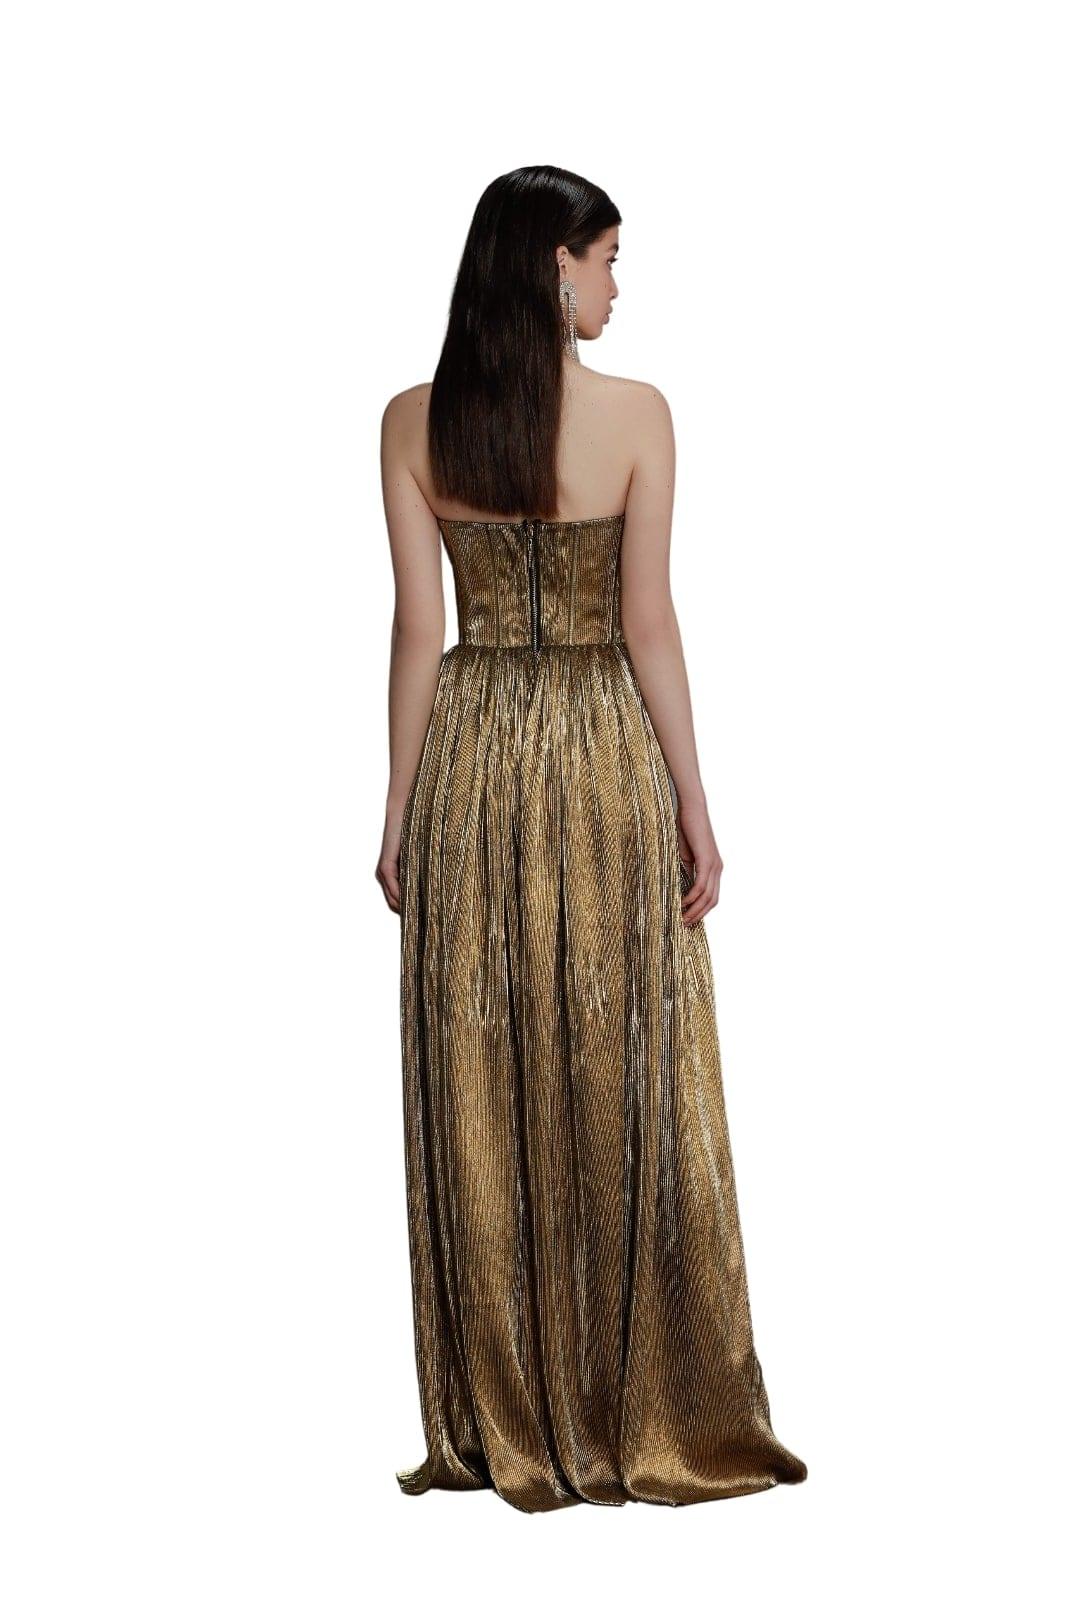 florence-strapless-gold-gown-03